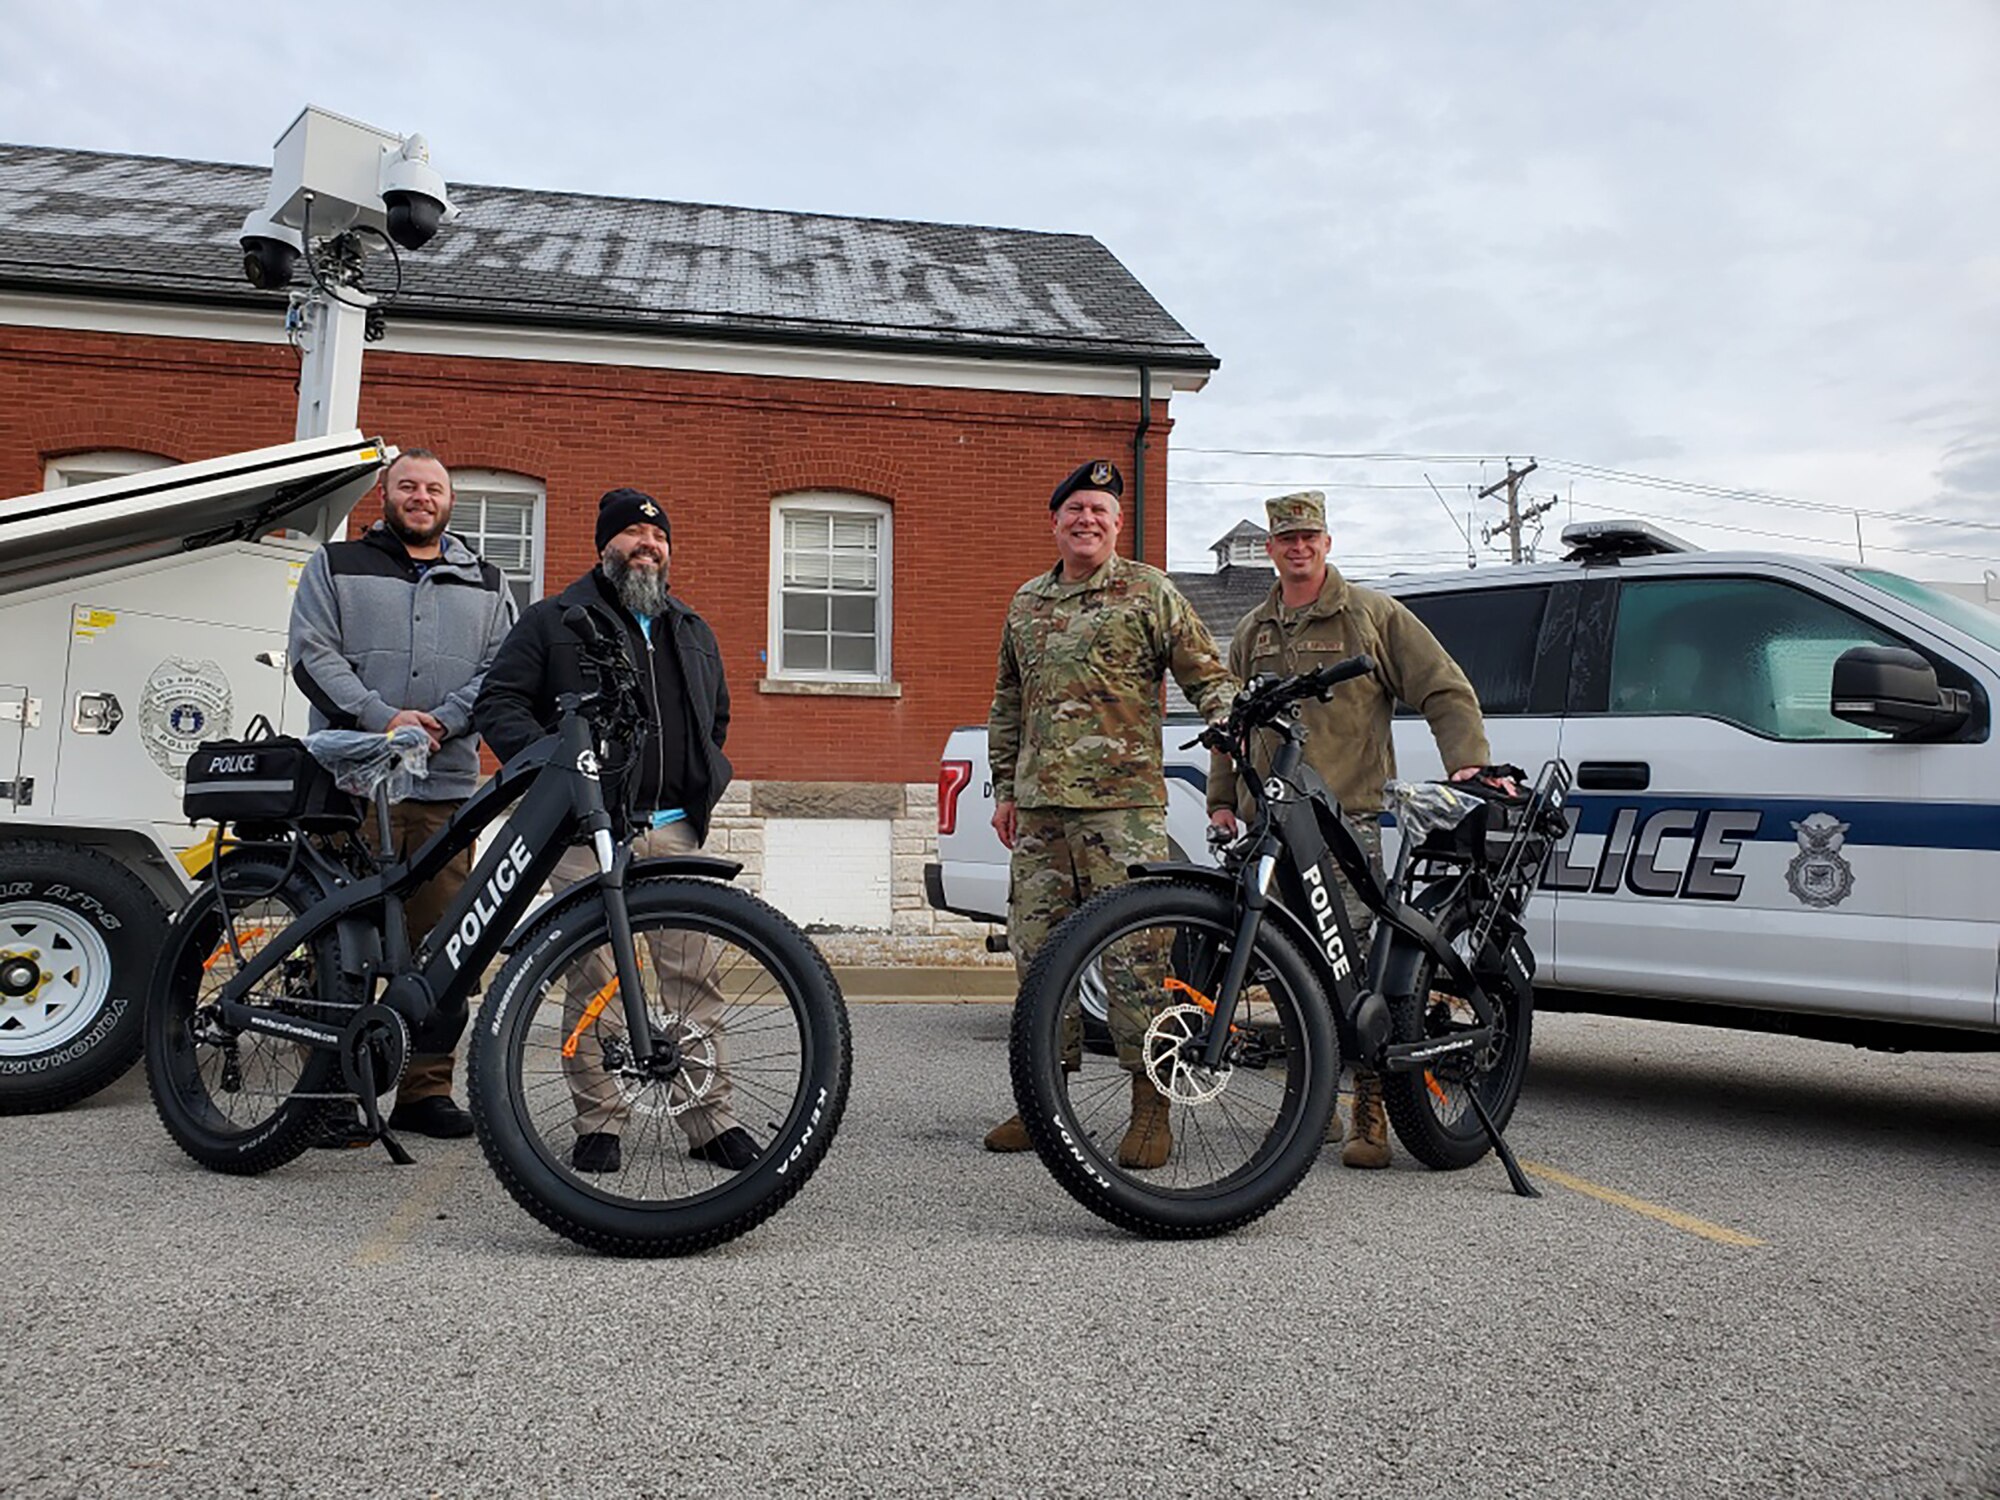 Department of the Air Force civilian police and Air National Guard members pose with electric bicycles delivered to Jefferson Barracks Air National Guard Station, St. Louis, Missouri, December 15, 2020. The newly-formed civilian police force will patrol the installation using bicycles and vehicles. (Courtesy Photo)